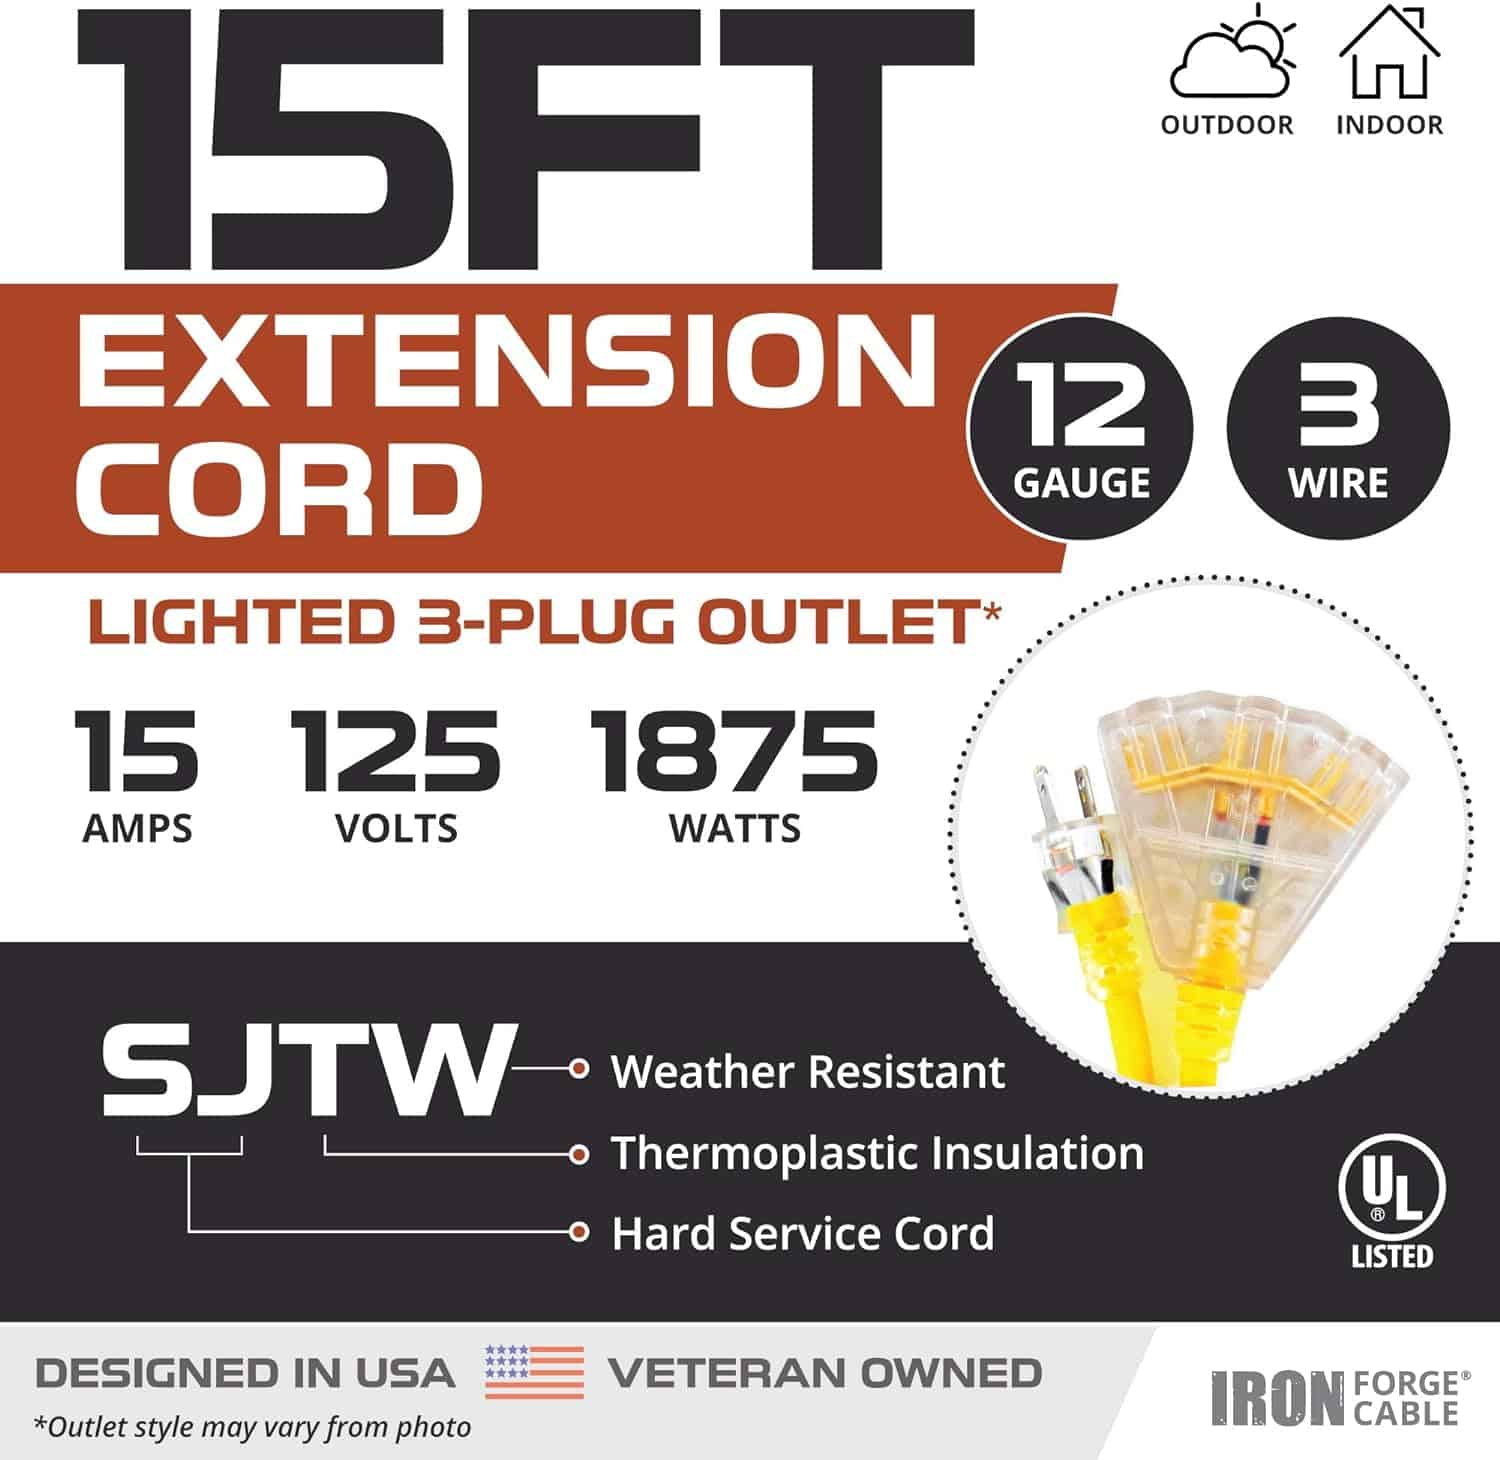 IRON FORGE CABLE 15 Foot Lighted Outdoor Extension Cord with 3 Electrical Power Outlets – 12 3 SJTW Heavy Duty Yellow Extension Cable with 3 Prong Grounded Plug for Safety 2